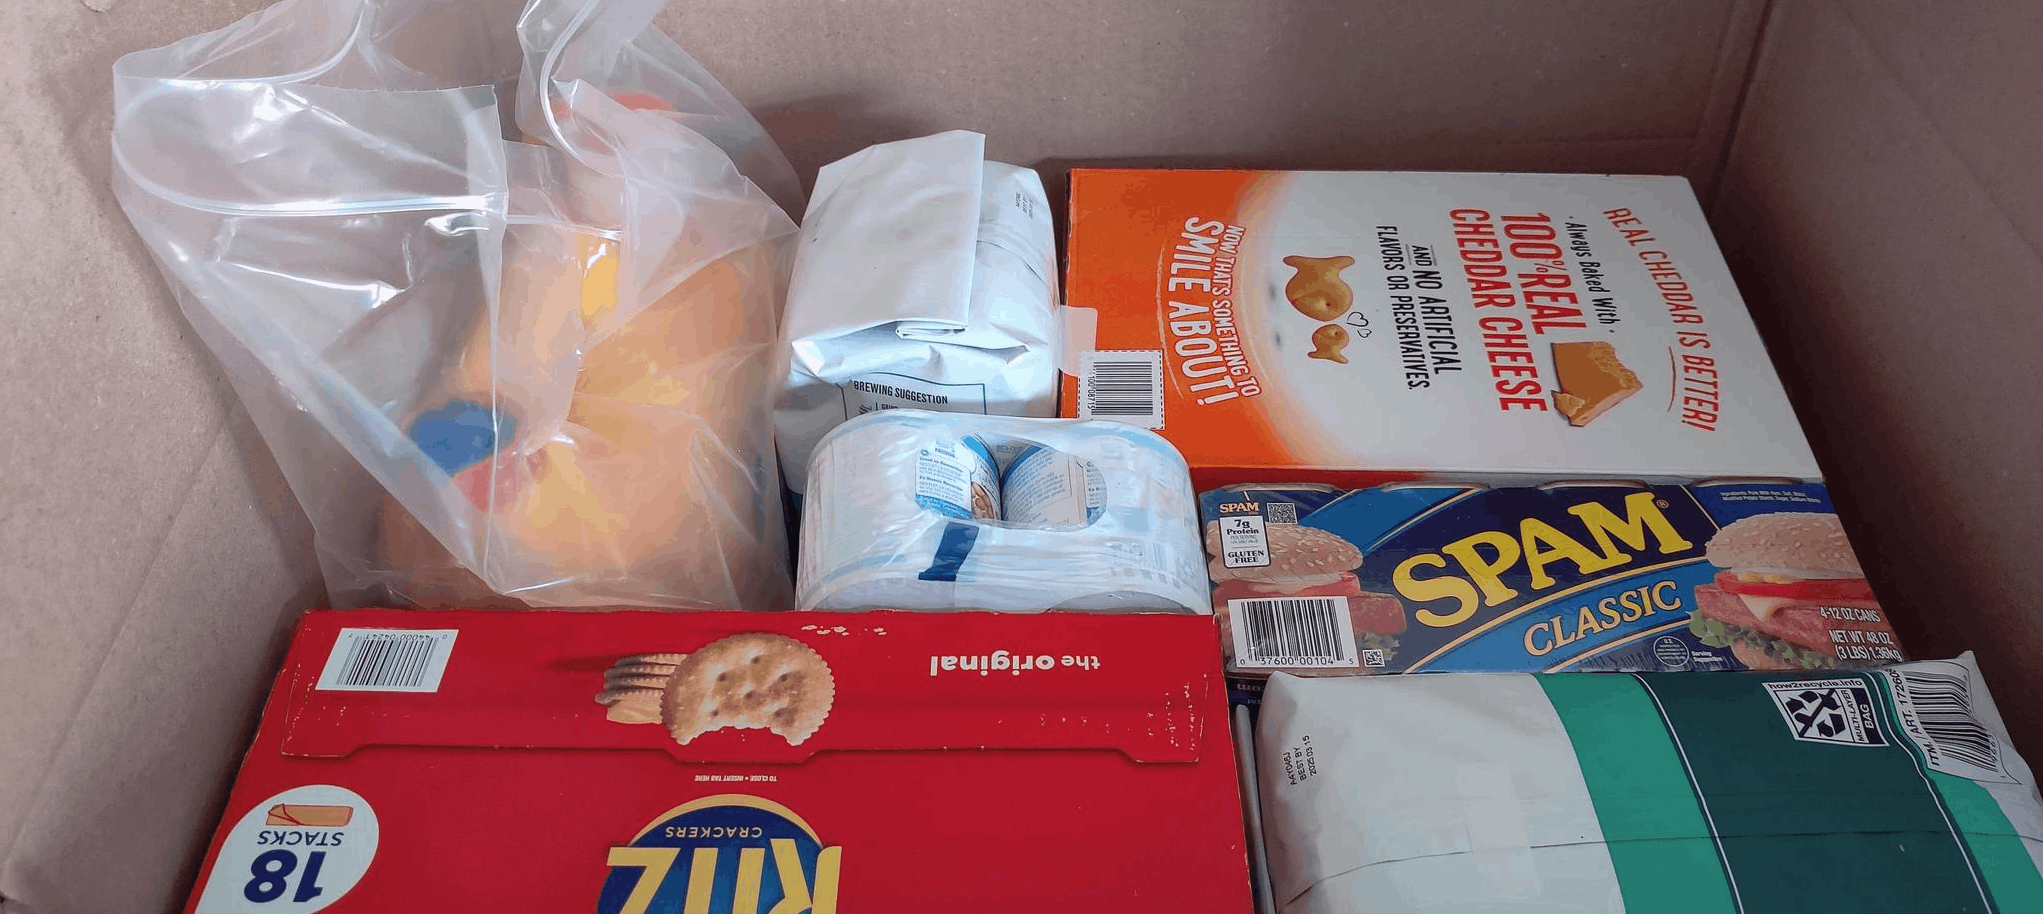 Boxed packed edge to edge with spam, detergent, crackers, coffee and condensed milk